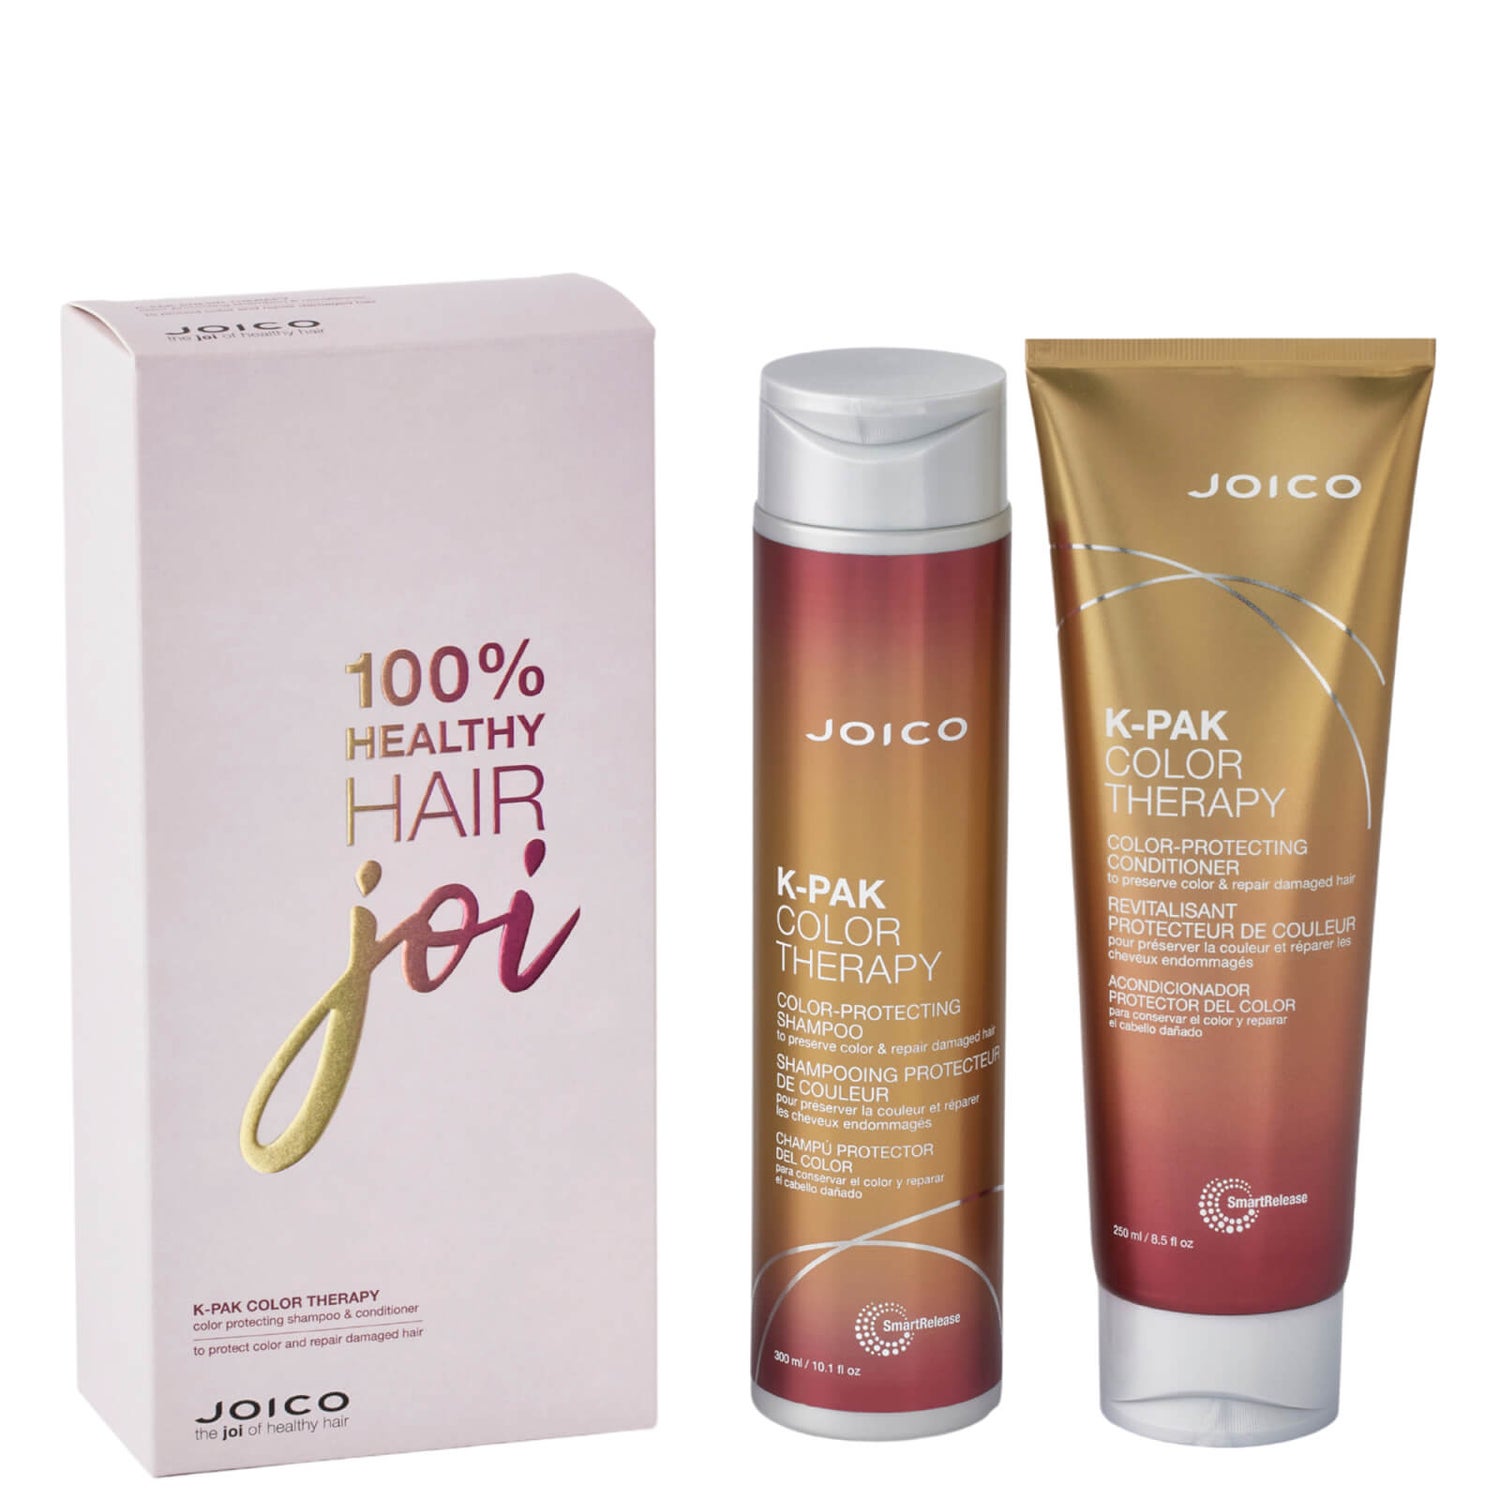 Joico K-Pak Colour Therapy Healthy Hair Joi Gift Set (Worth £46.00)